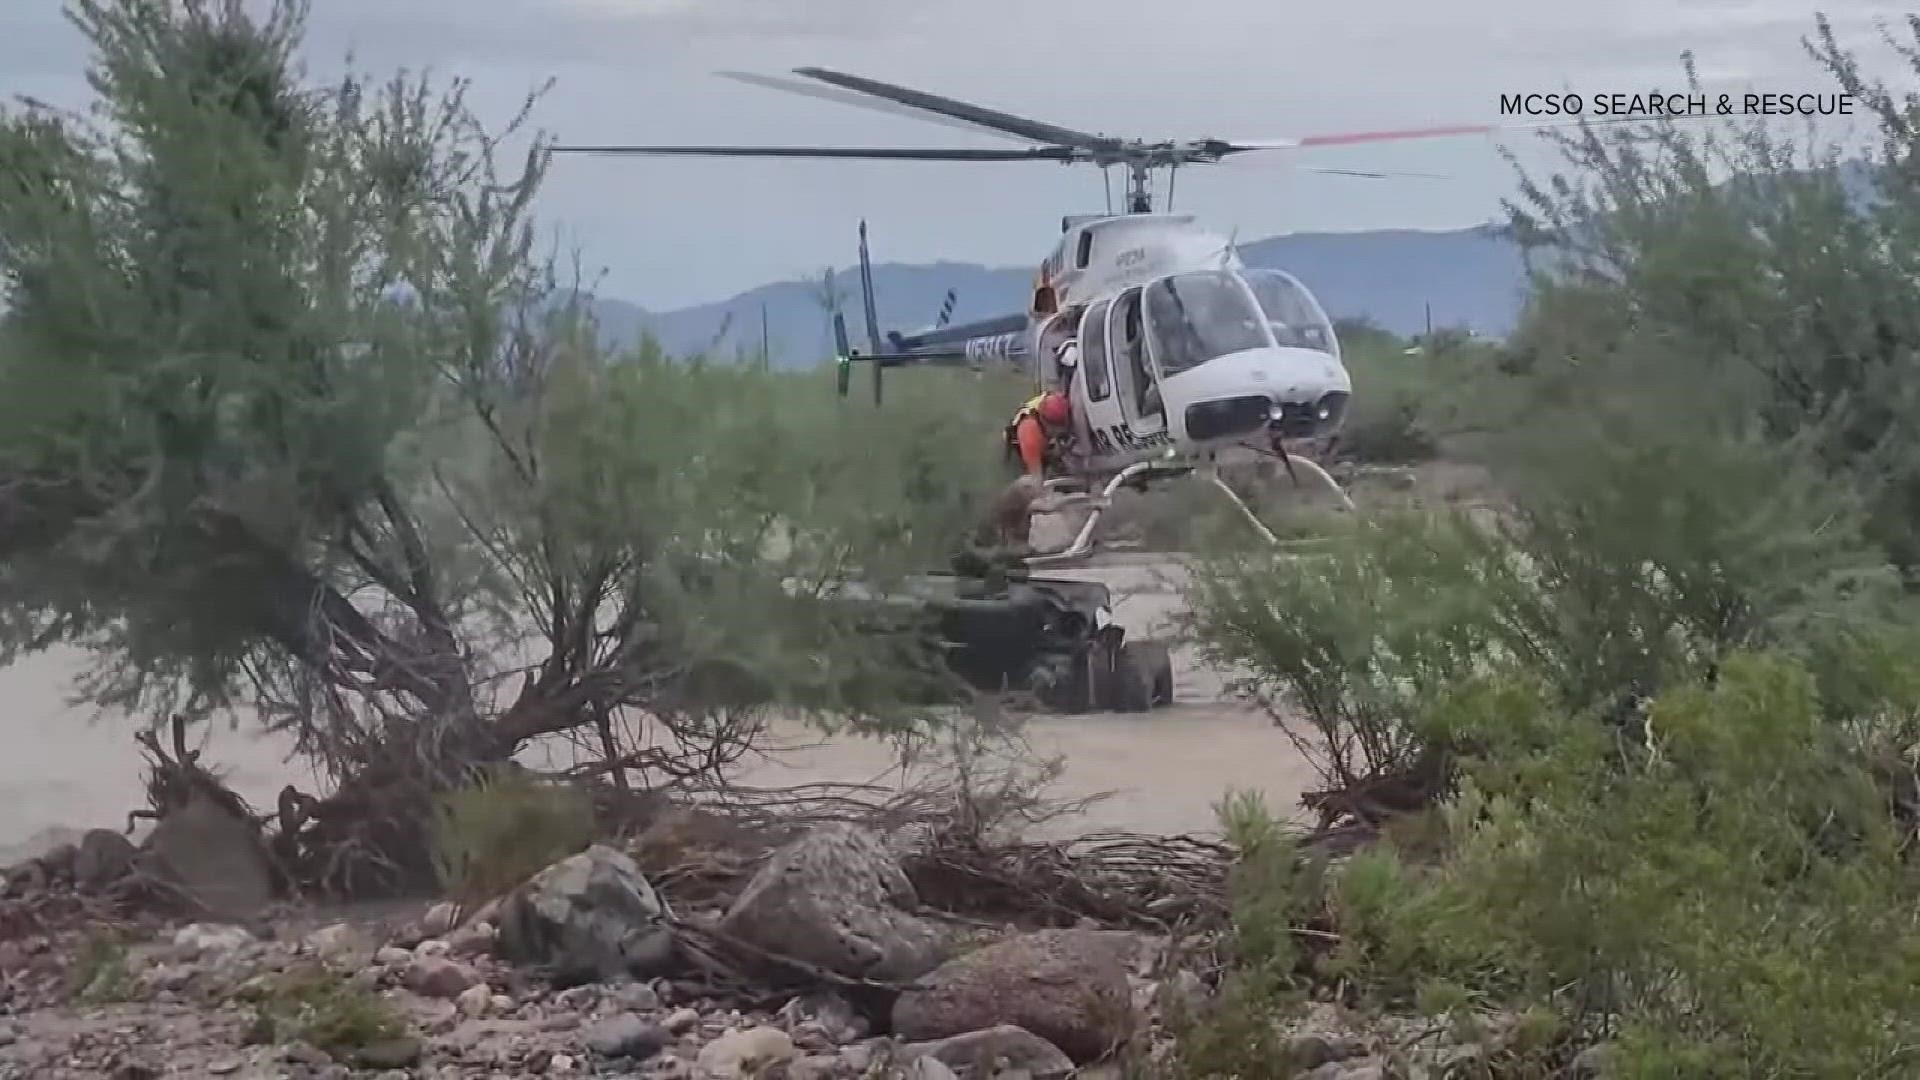 Search and rescue teams used a helicopter to save a 75-year-old from floodwaters in Golden Valley Friday afternoon.